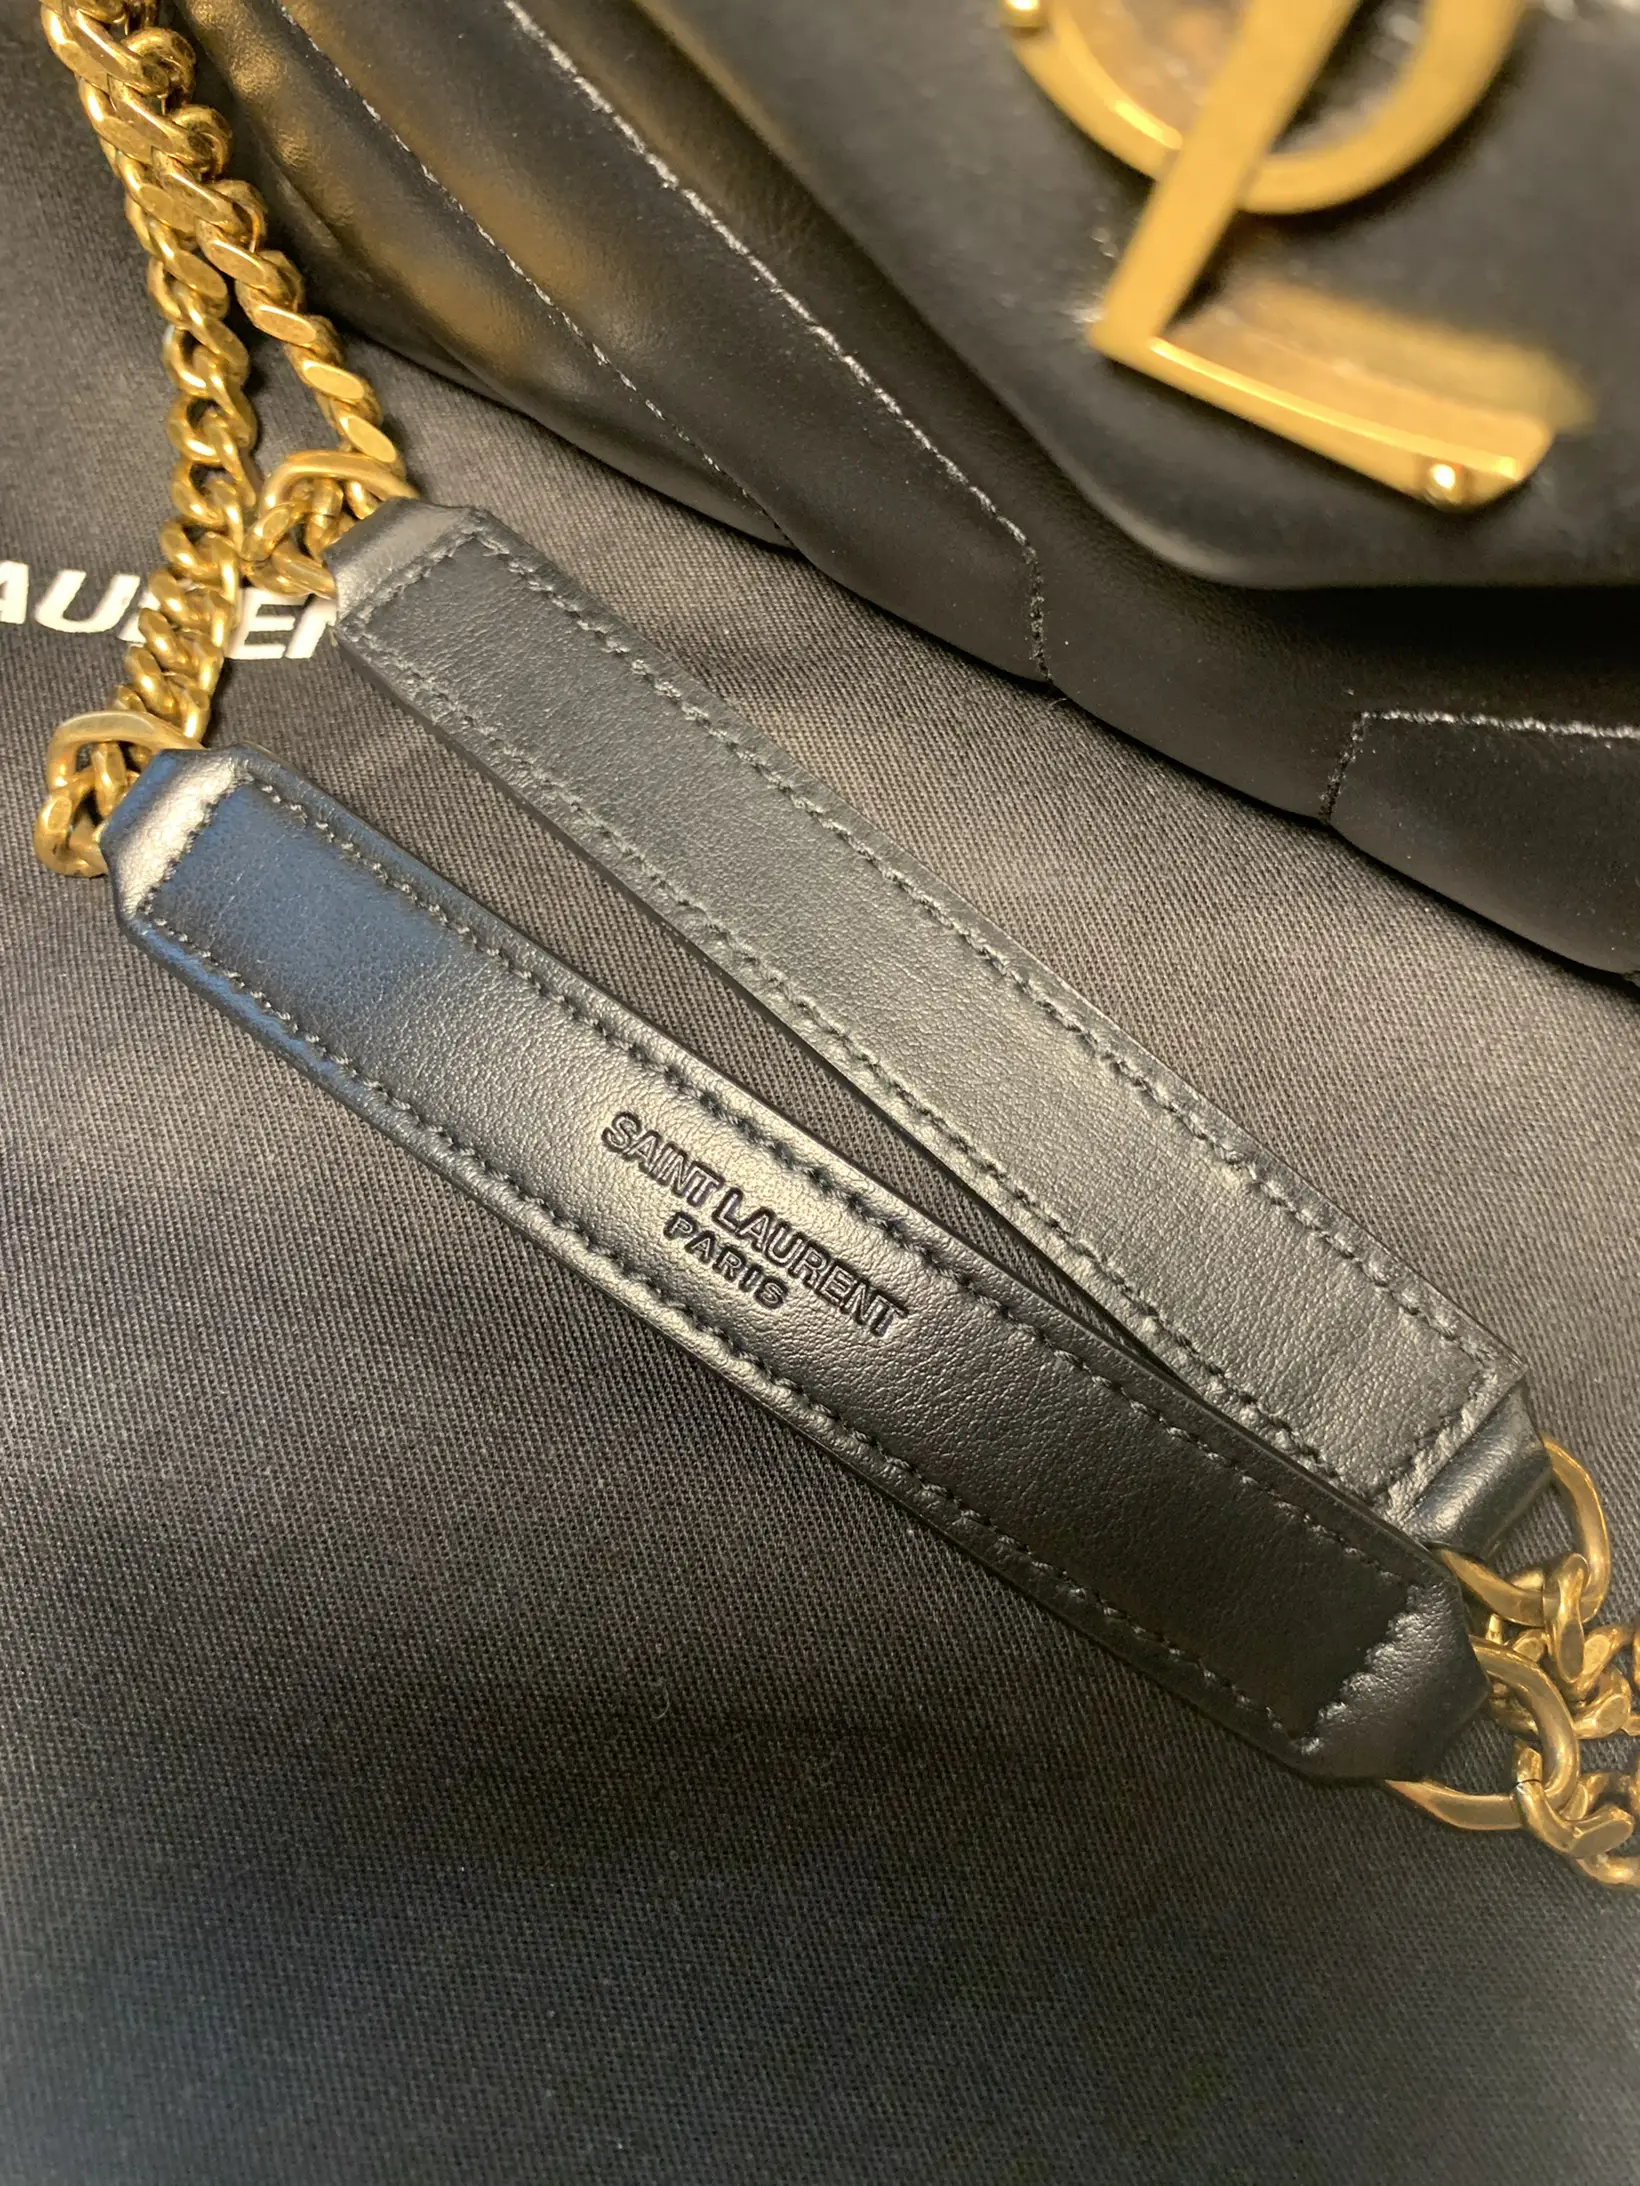 YSL Sunset Bag Review + Luxury Unboxing & What Fits 